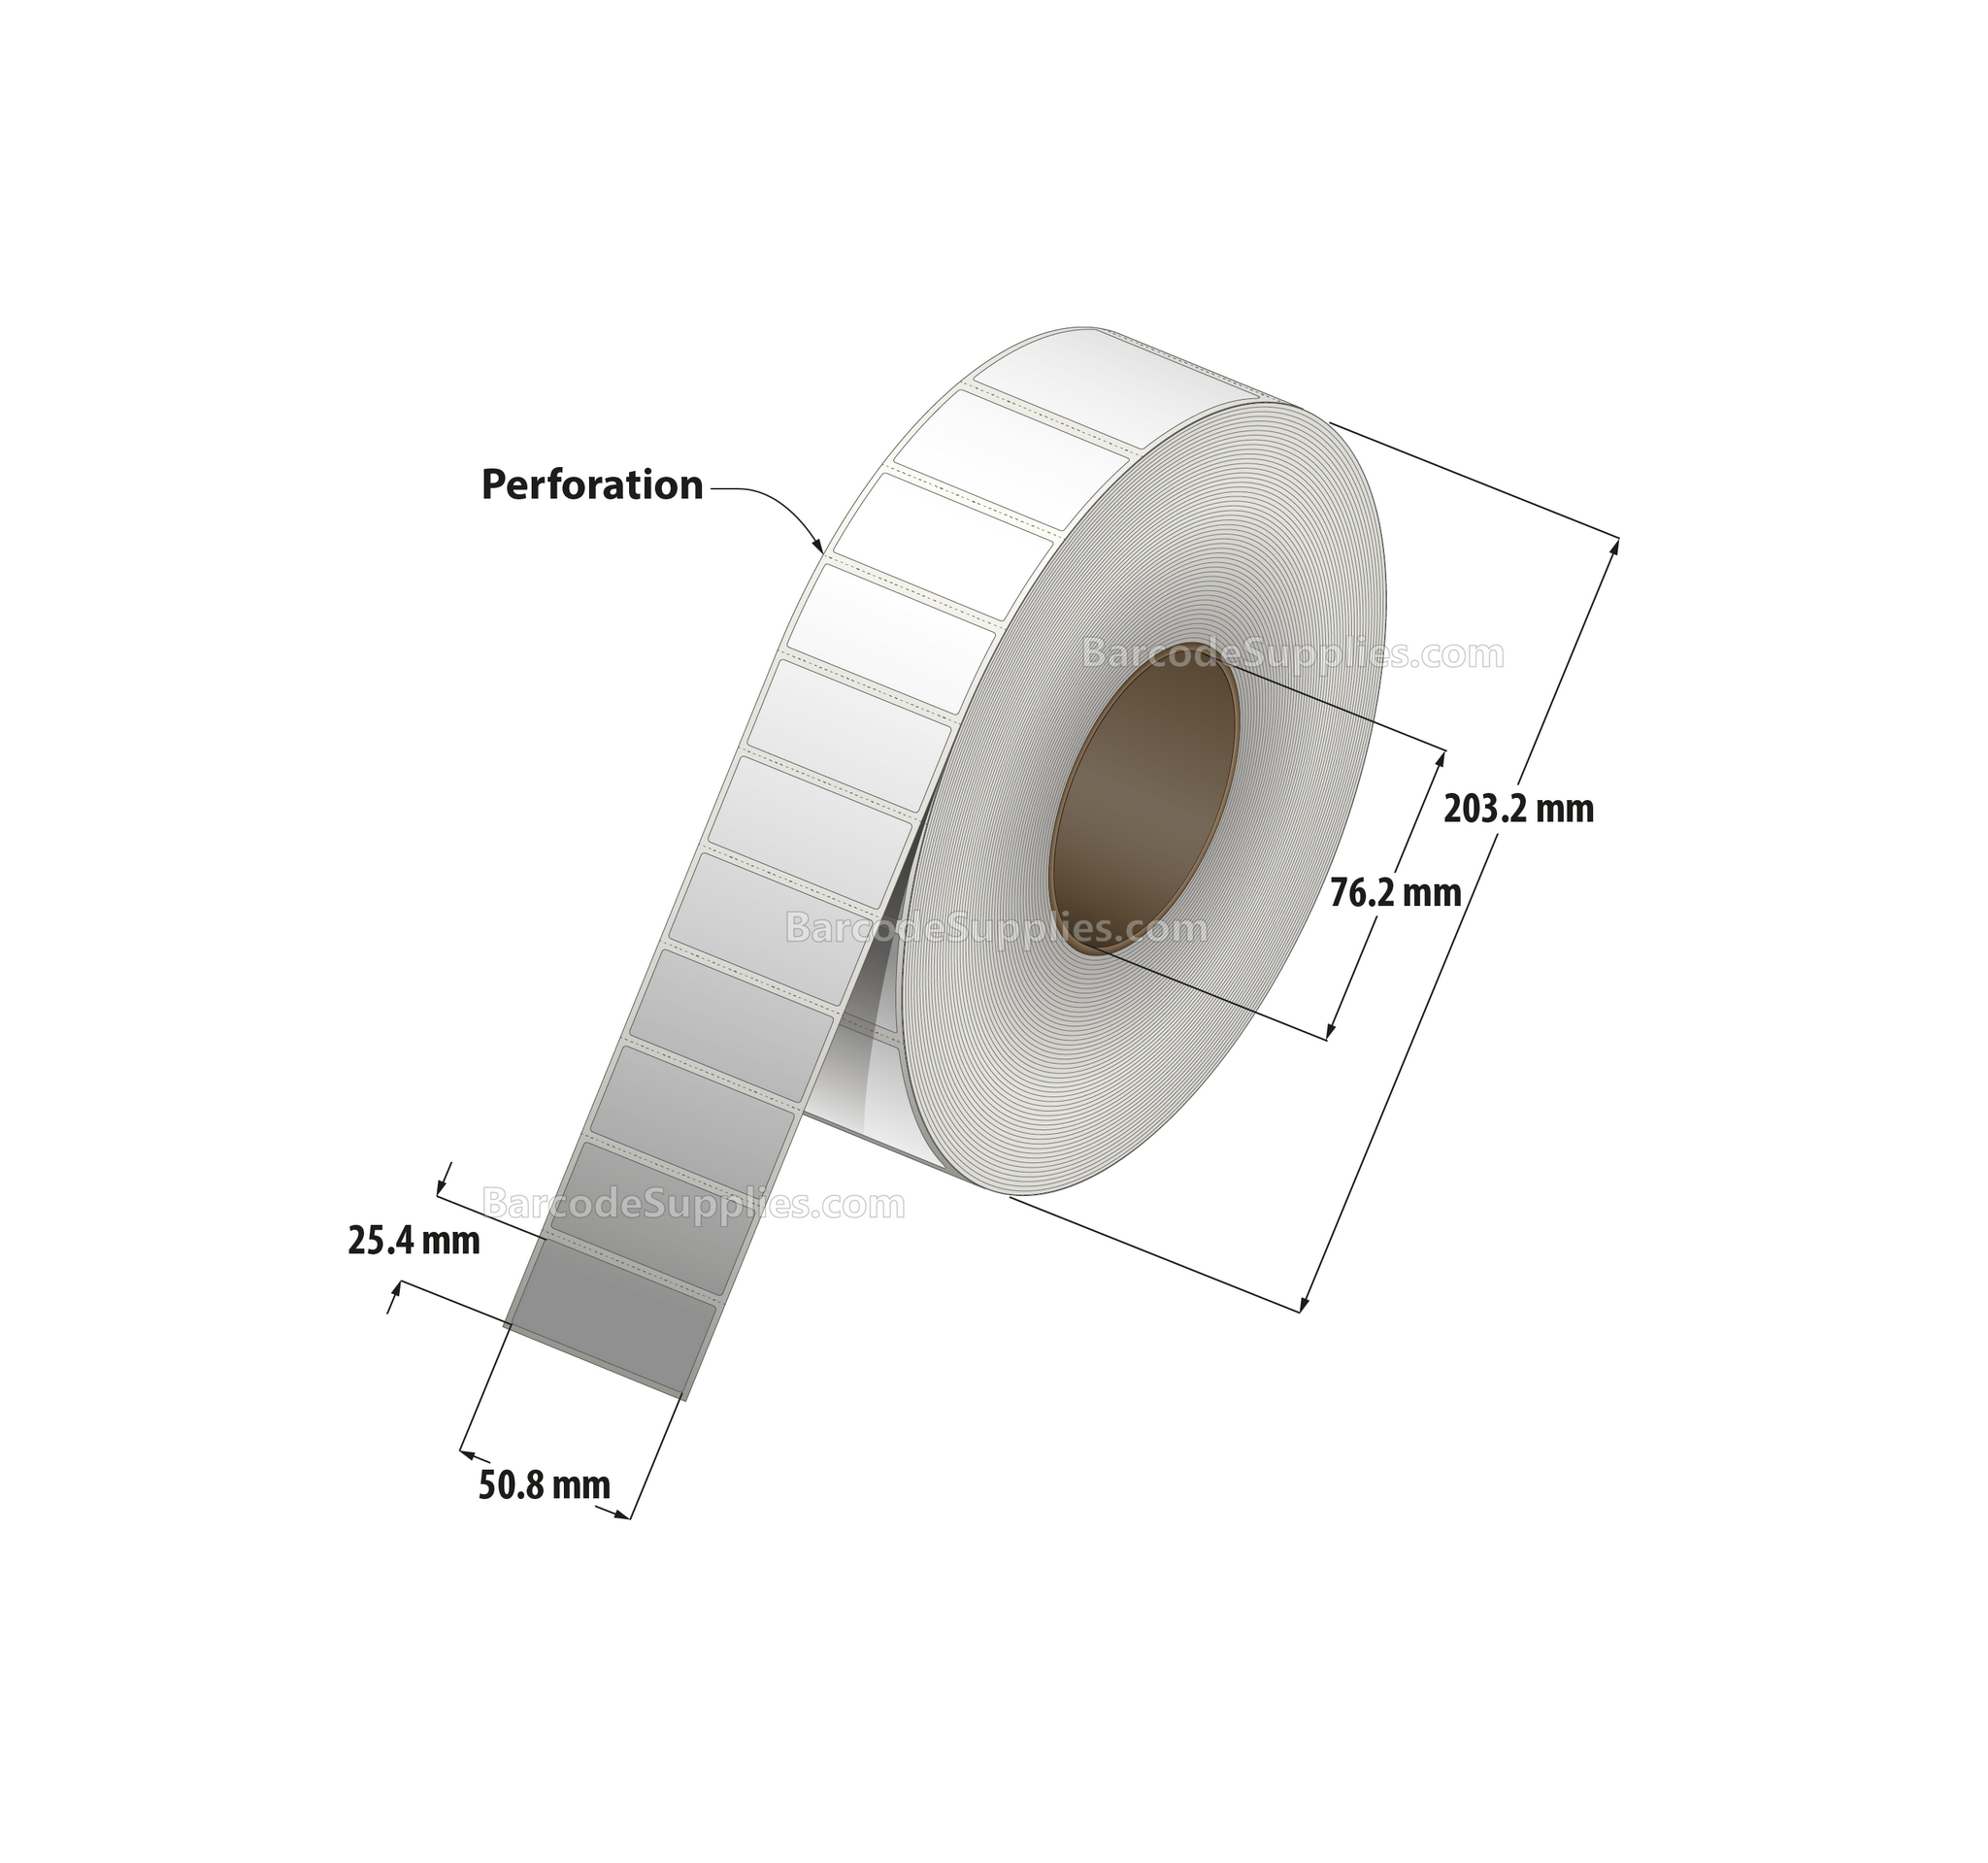 2 x 1 Thermal Transfer White Labels With Permanent Adhesive - Perforated - 5150 Labels Per Roll - Carton Of 8 Rolls - 41200 Labels Total - MPN: RSP-2-1-5150-3